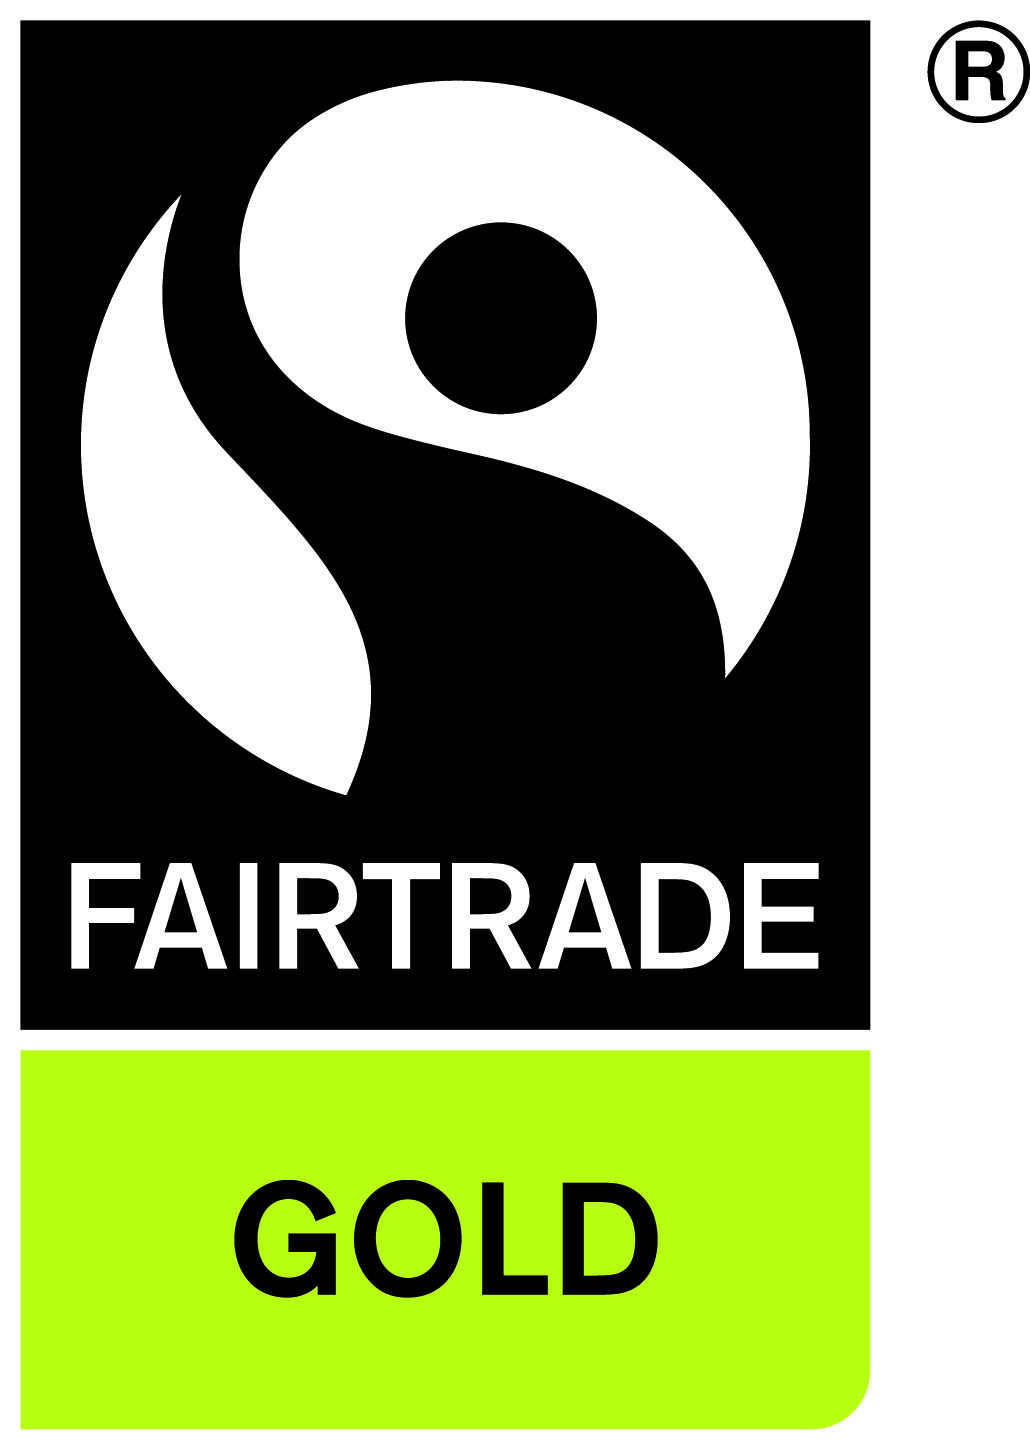 Fairtrade Gold is the most precious gold in the world. This program alleviates poverty for some of the poorest people on Earth, and keeps mercury out of our environment.